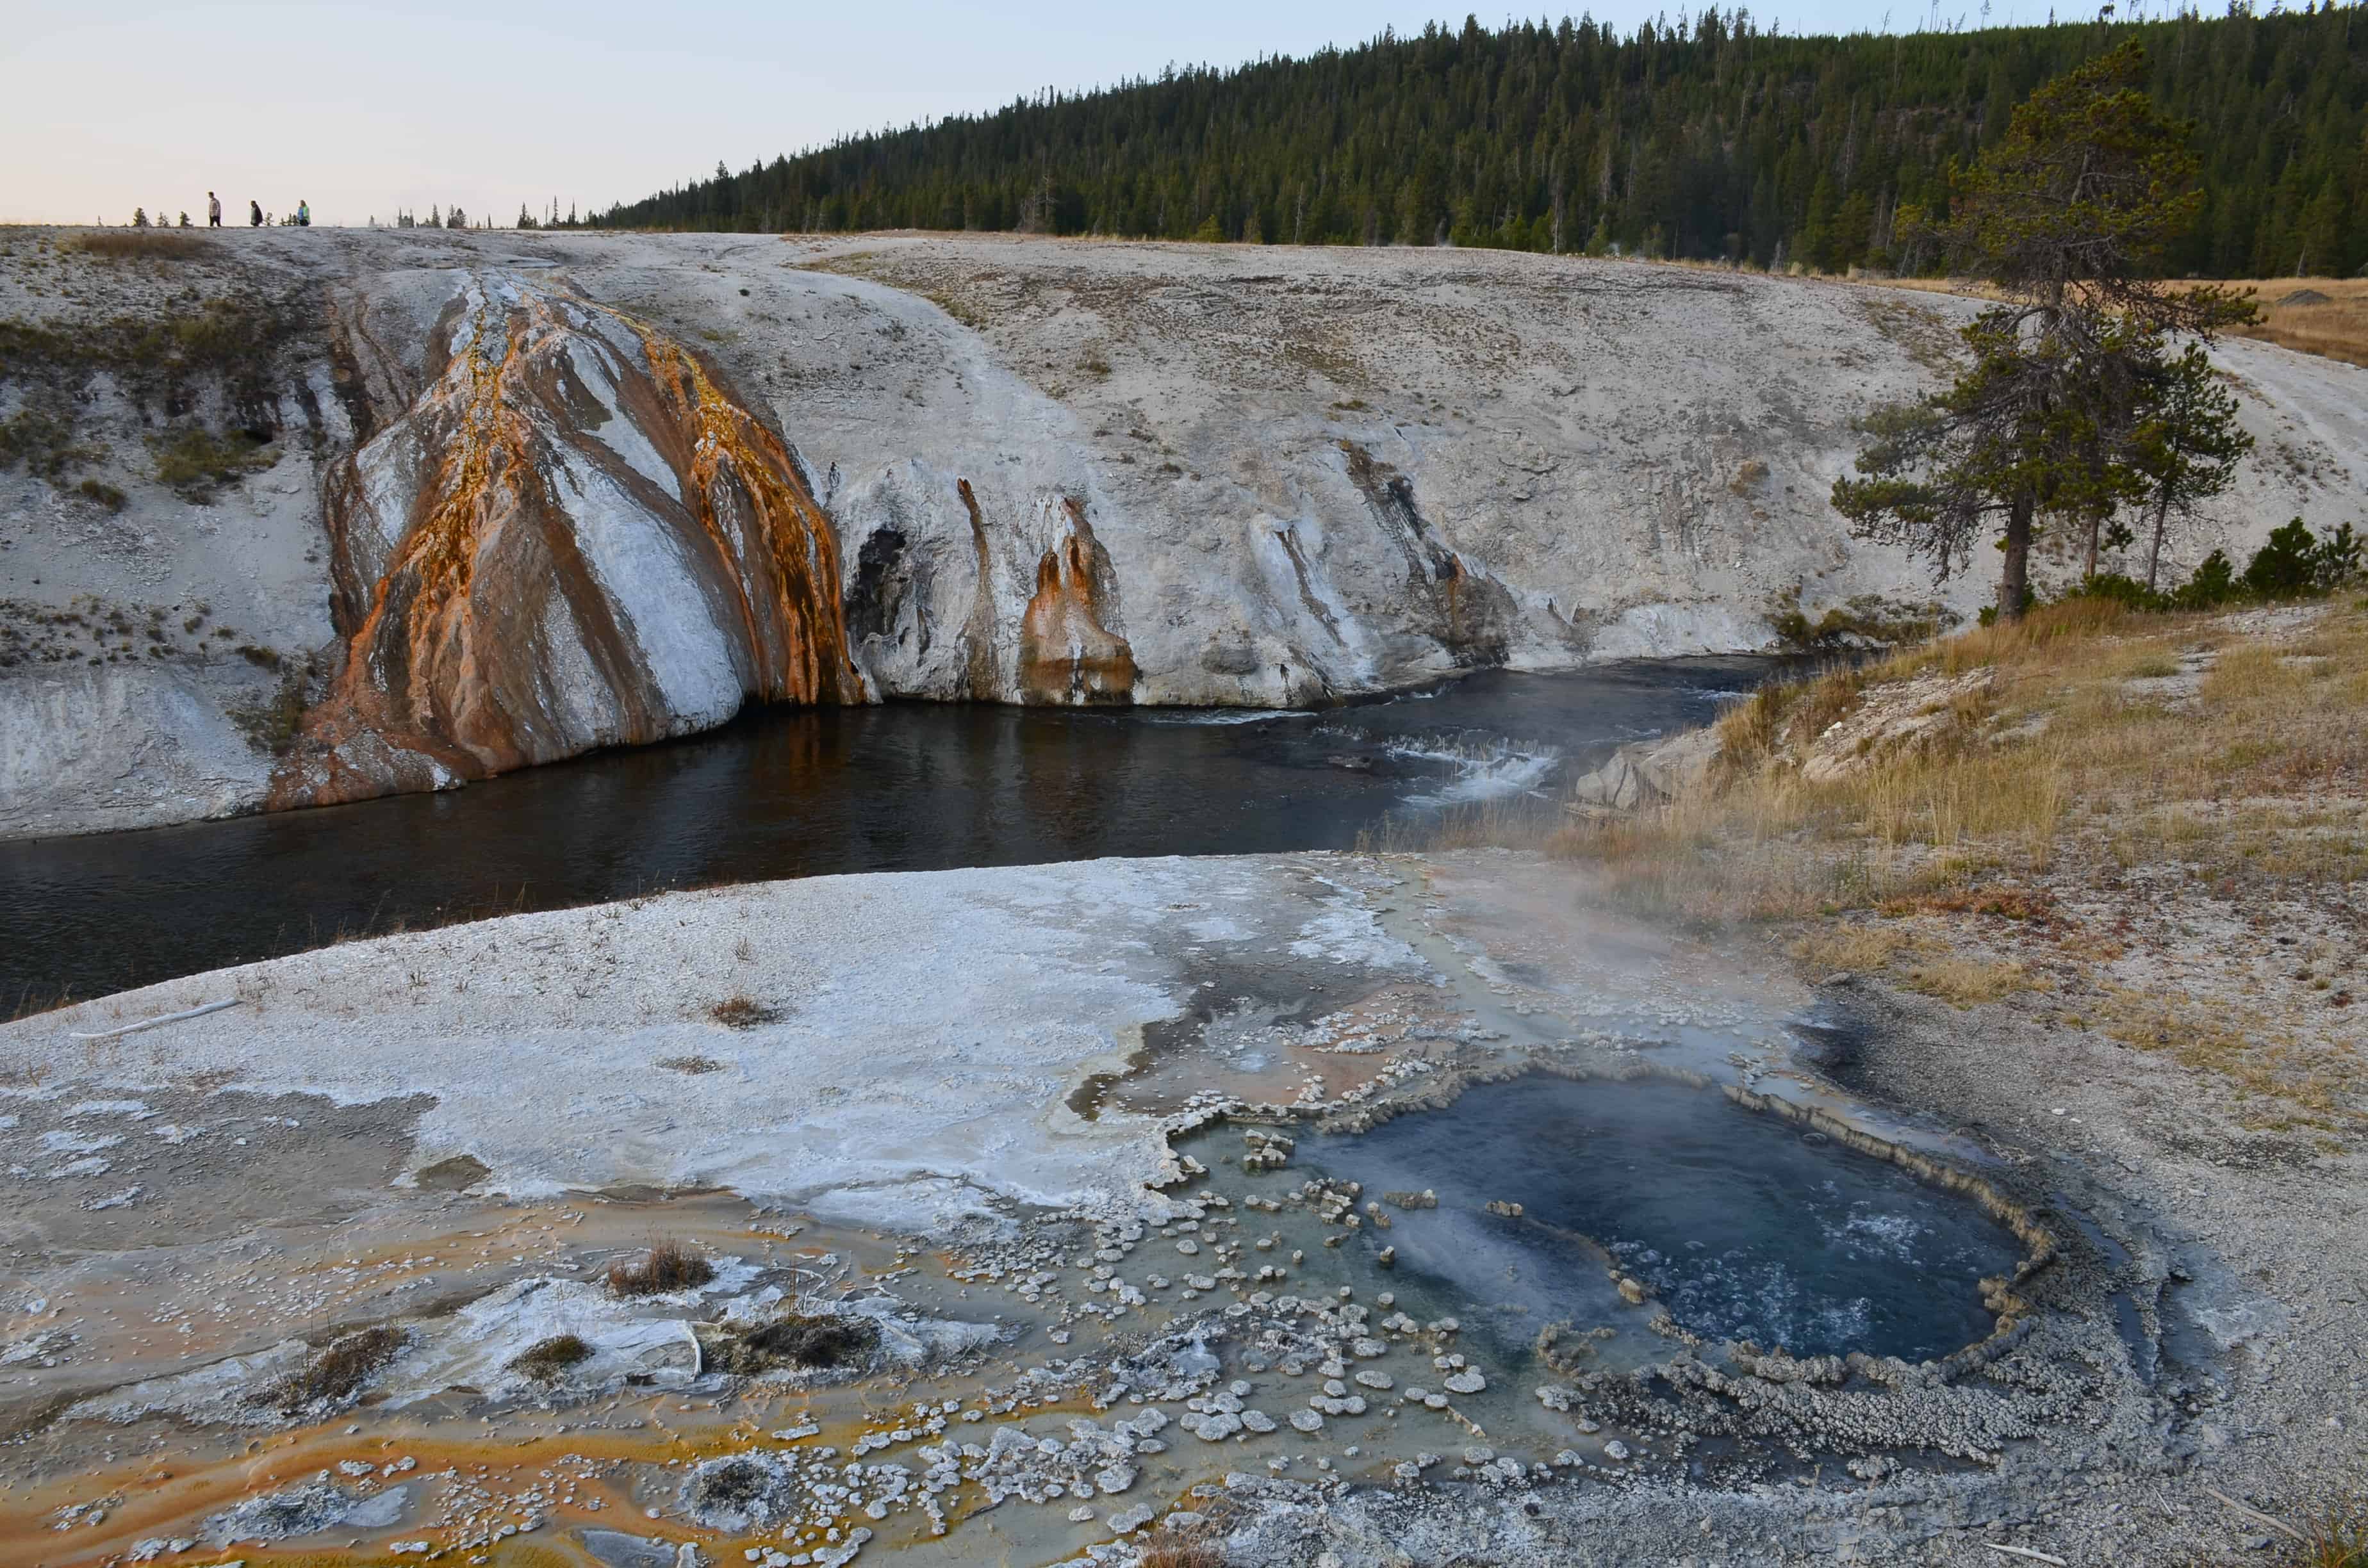 East Chinaman Spring and Cascade Geyser at the Upper Geyser Basin in Yellowstone National Park, Wyoming